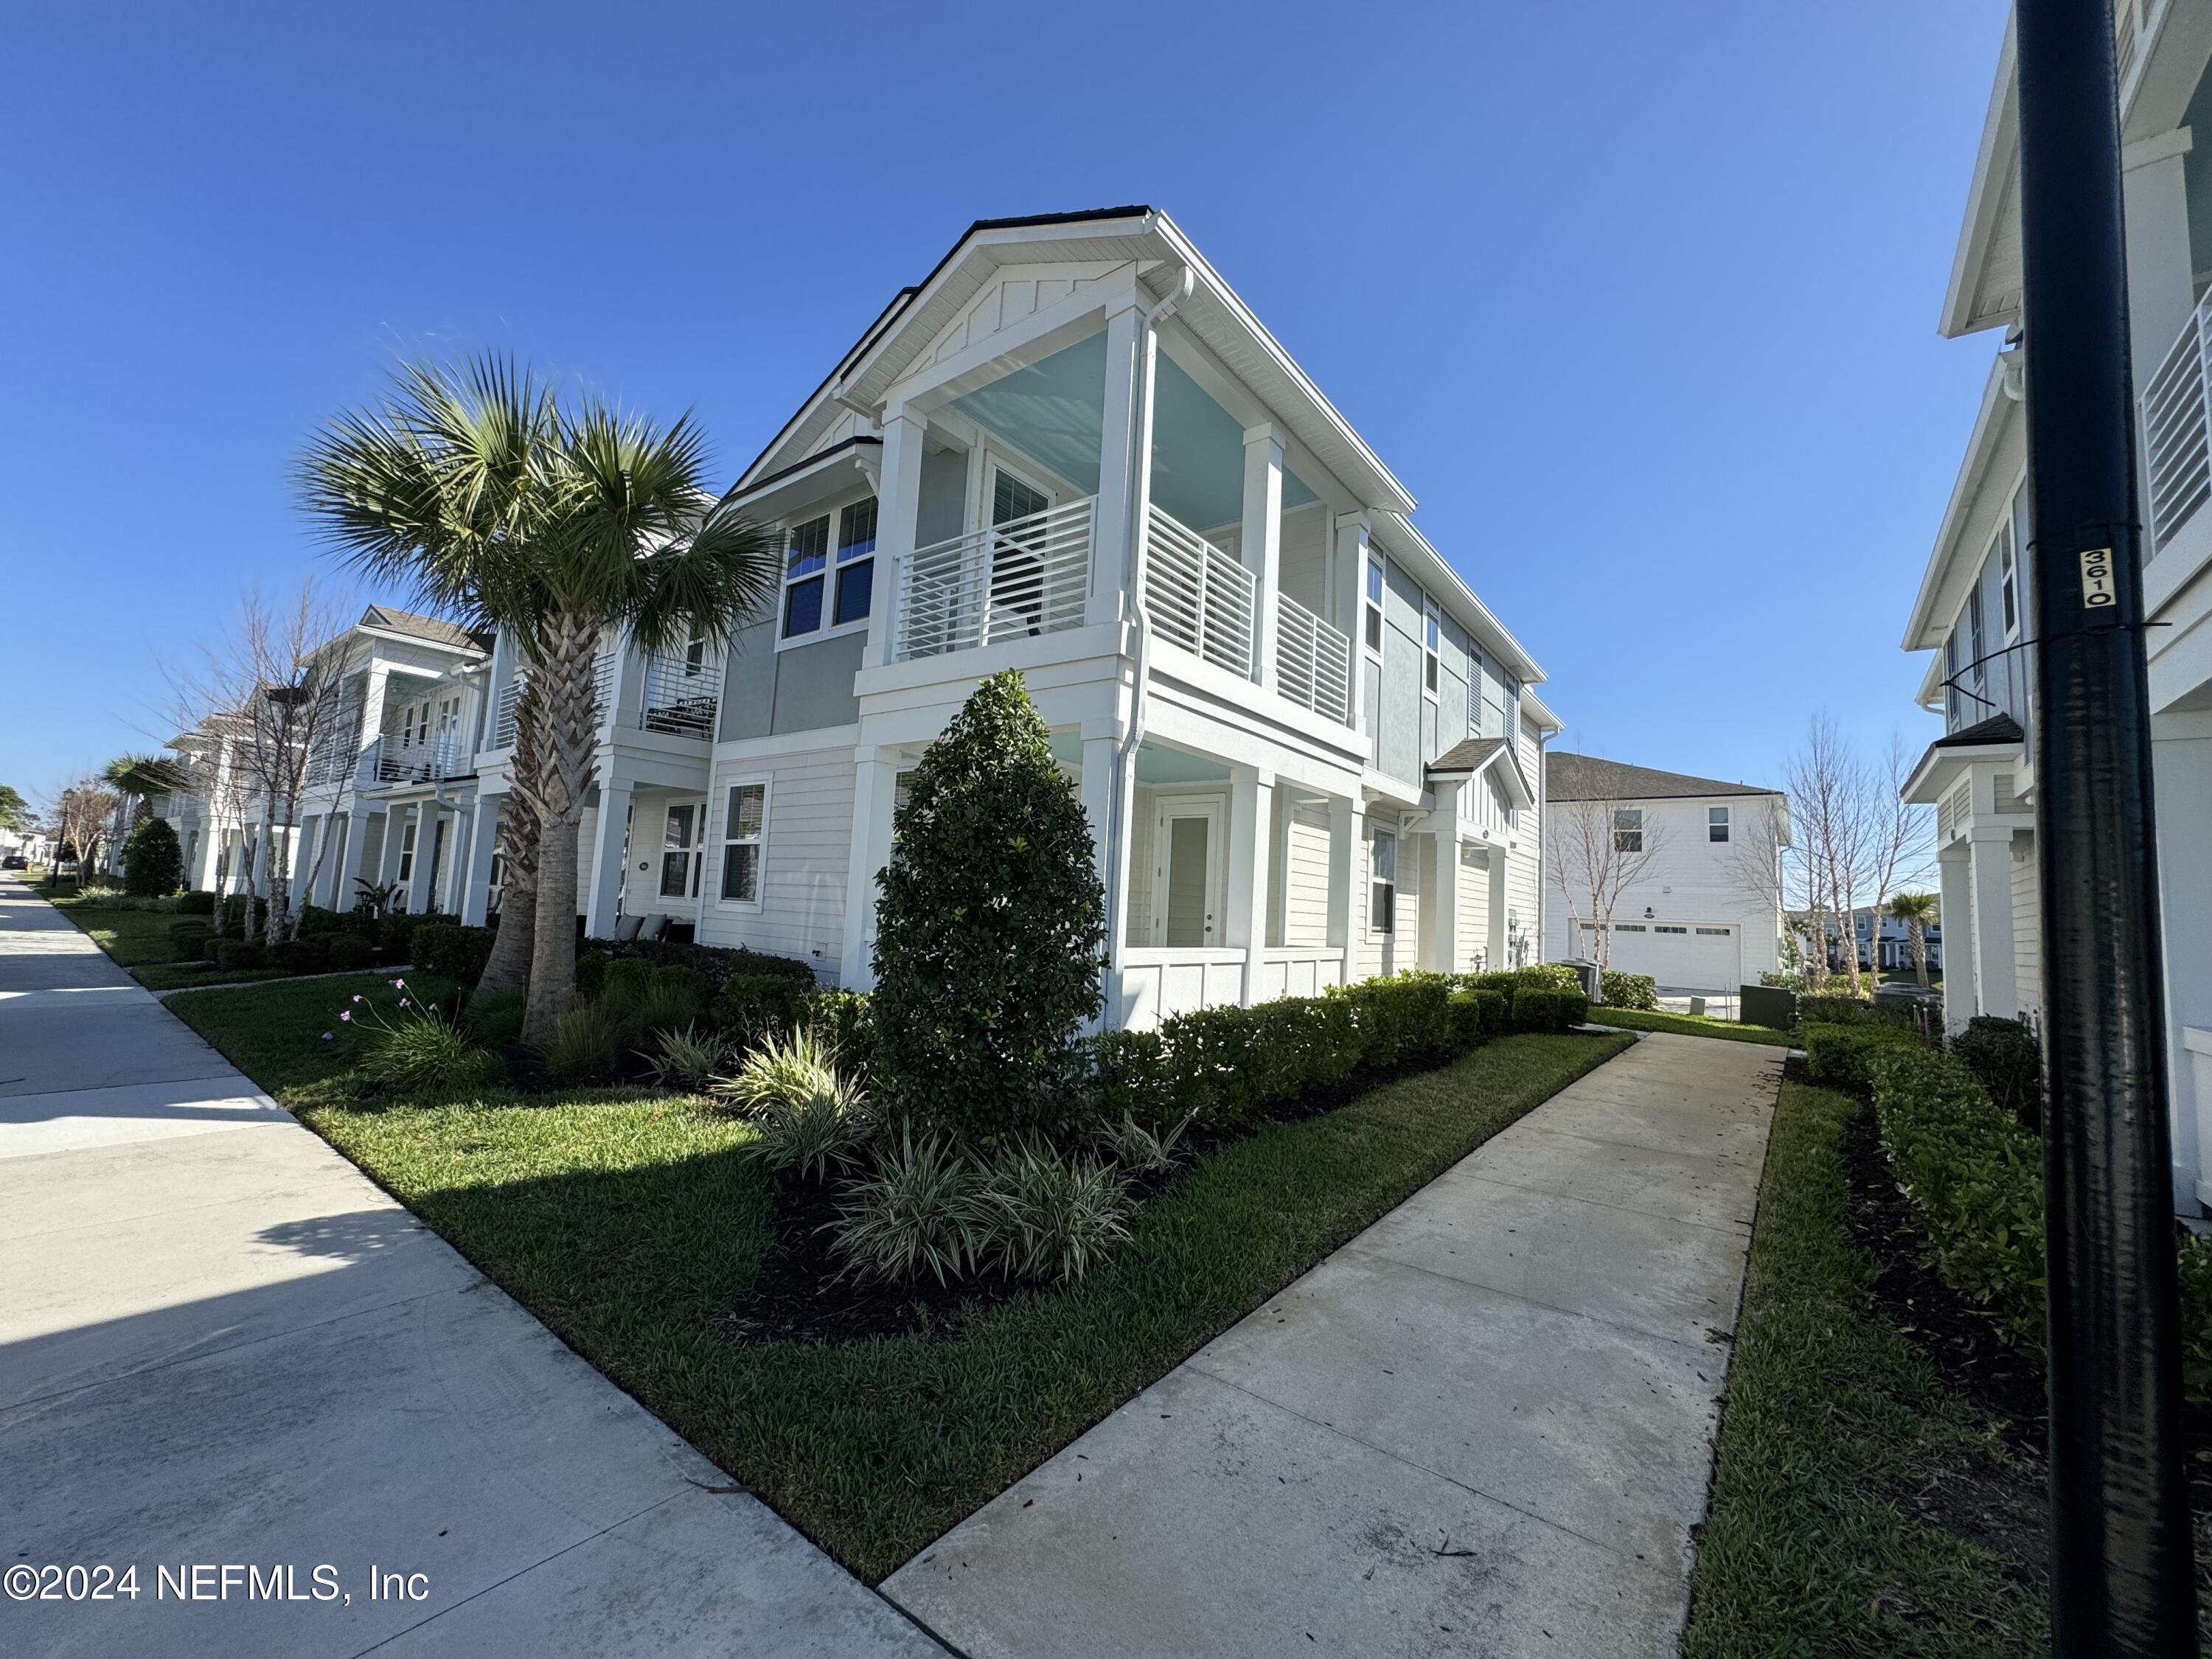 View Jacksonville, FL 32224 townhome